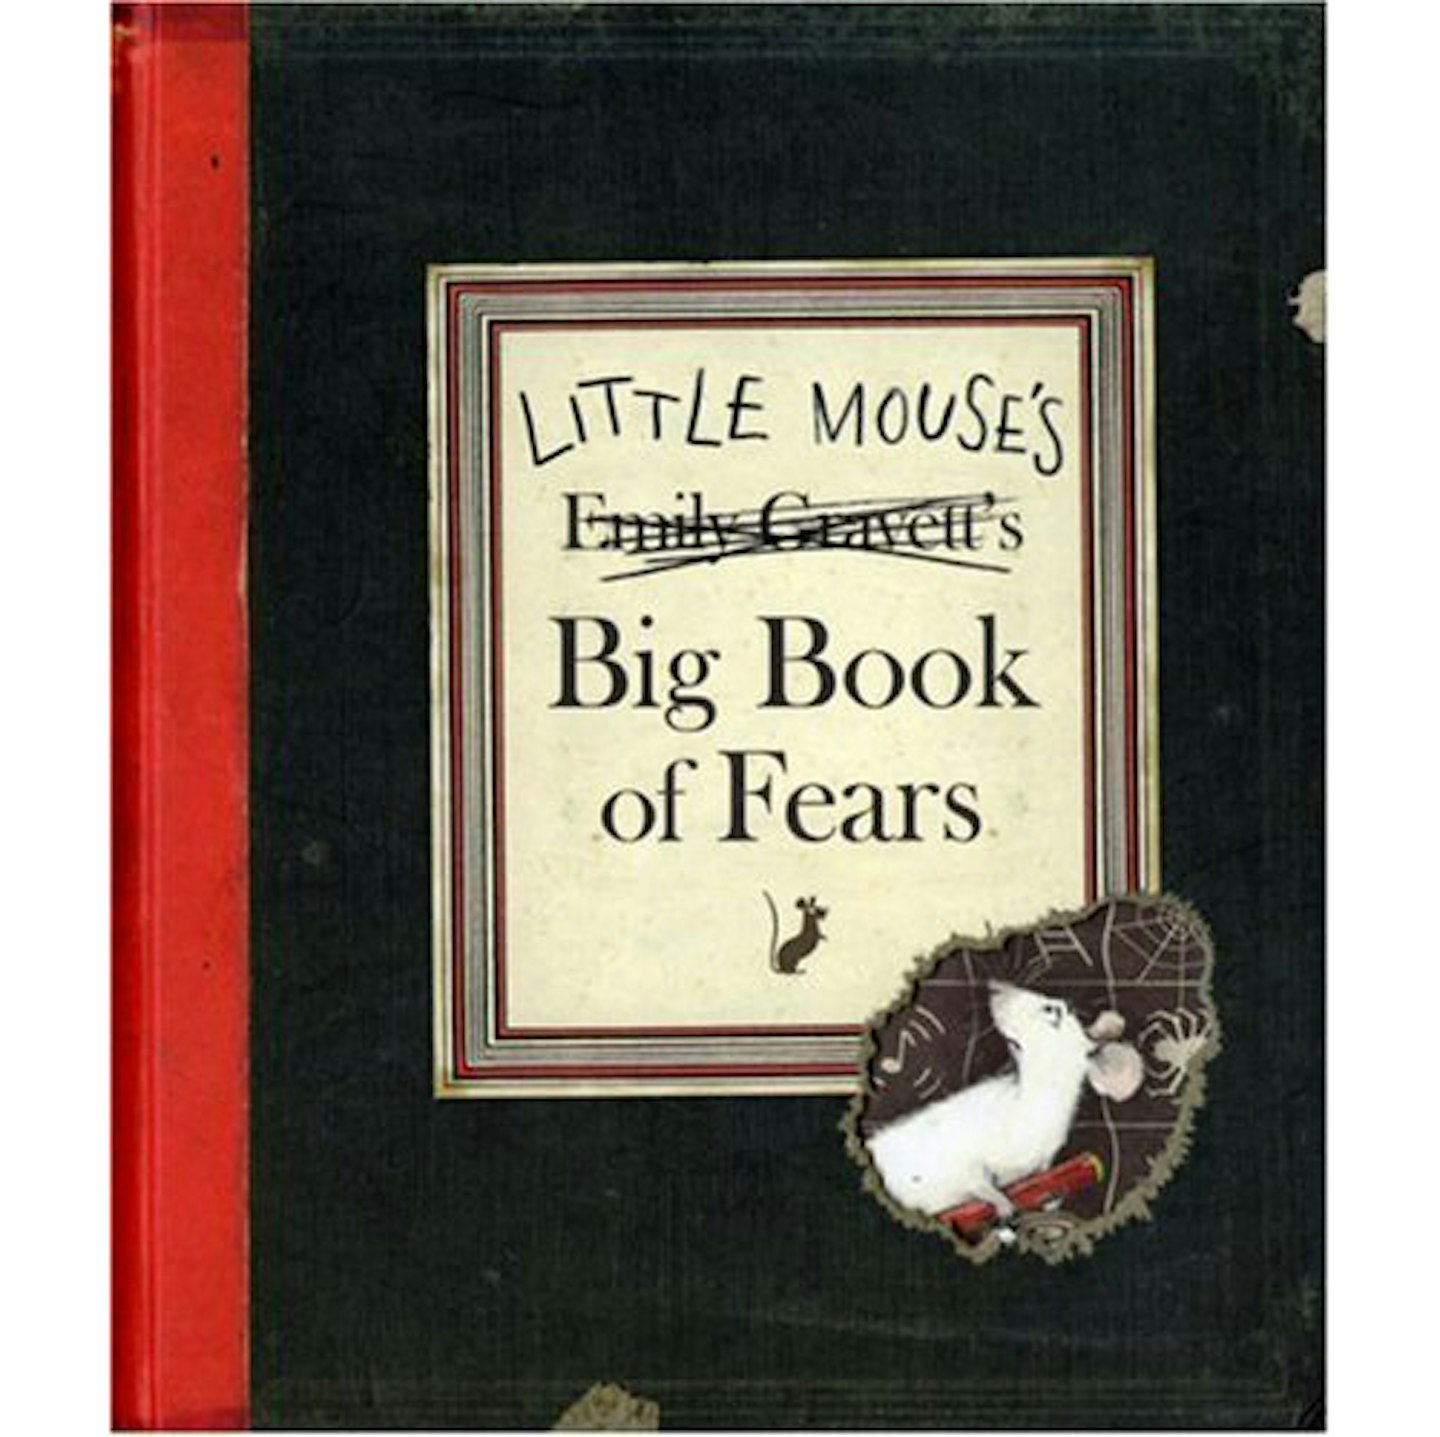 Little Mouse's Big Book of Fears by Emily Gravett